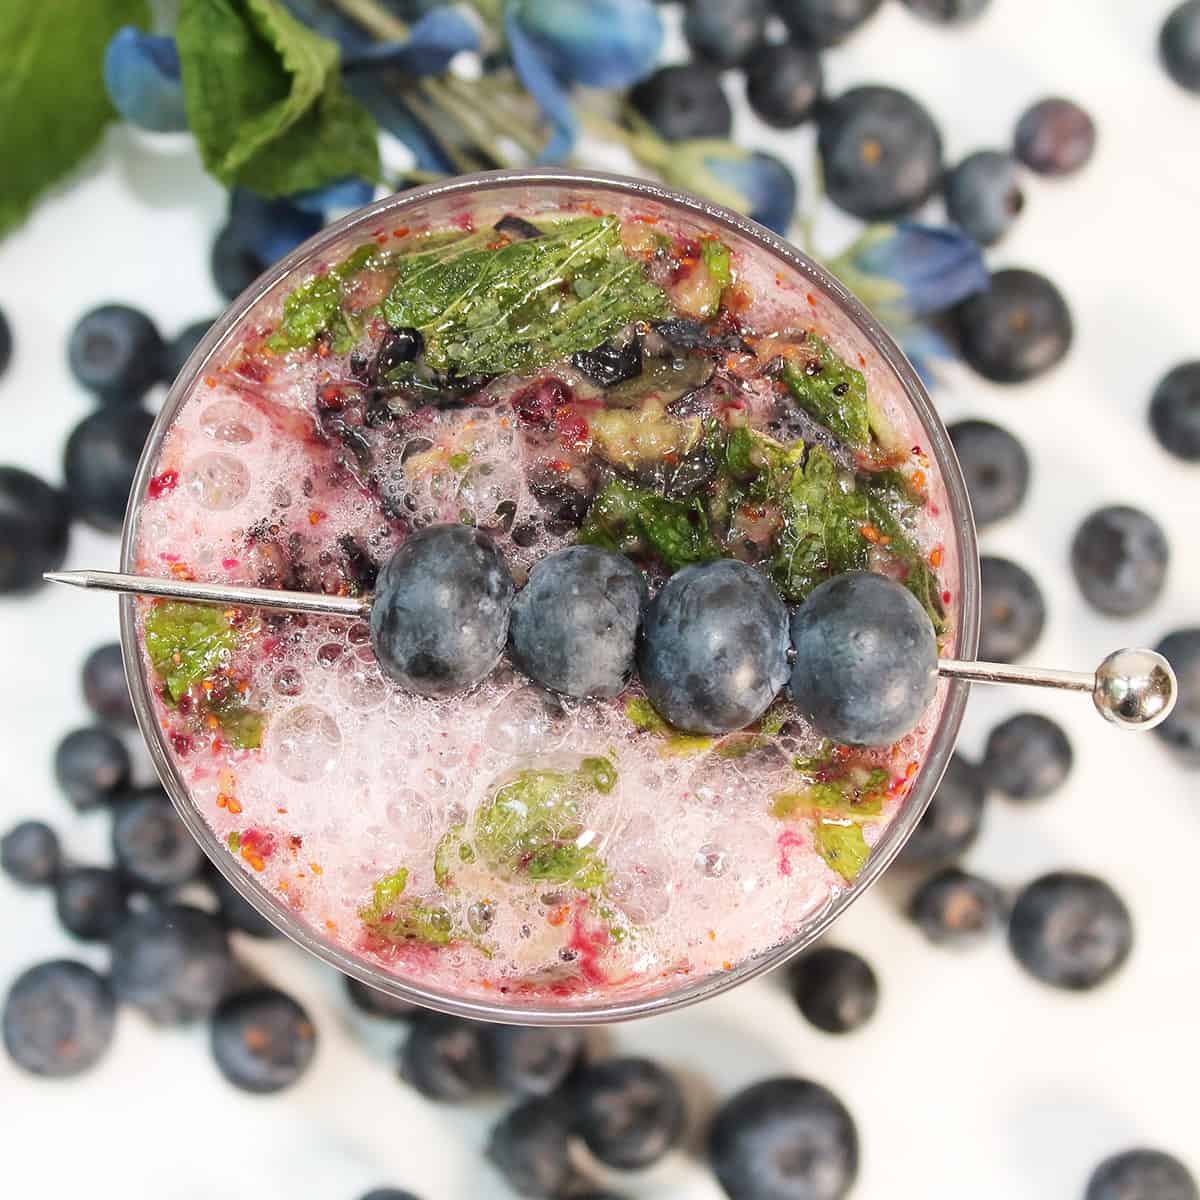 Overhead of fruity mojito amongst blueberries.